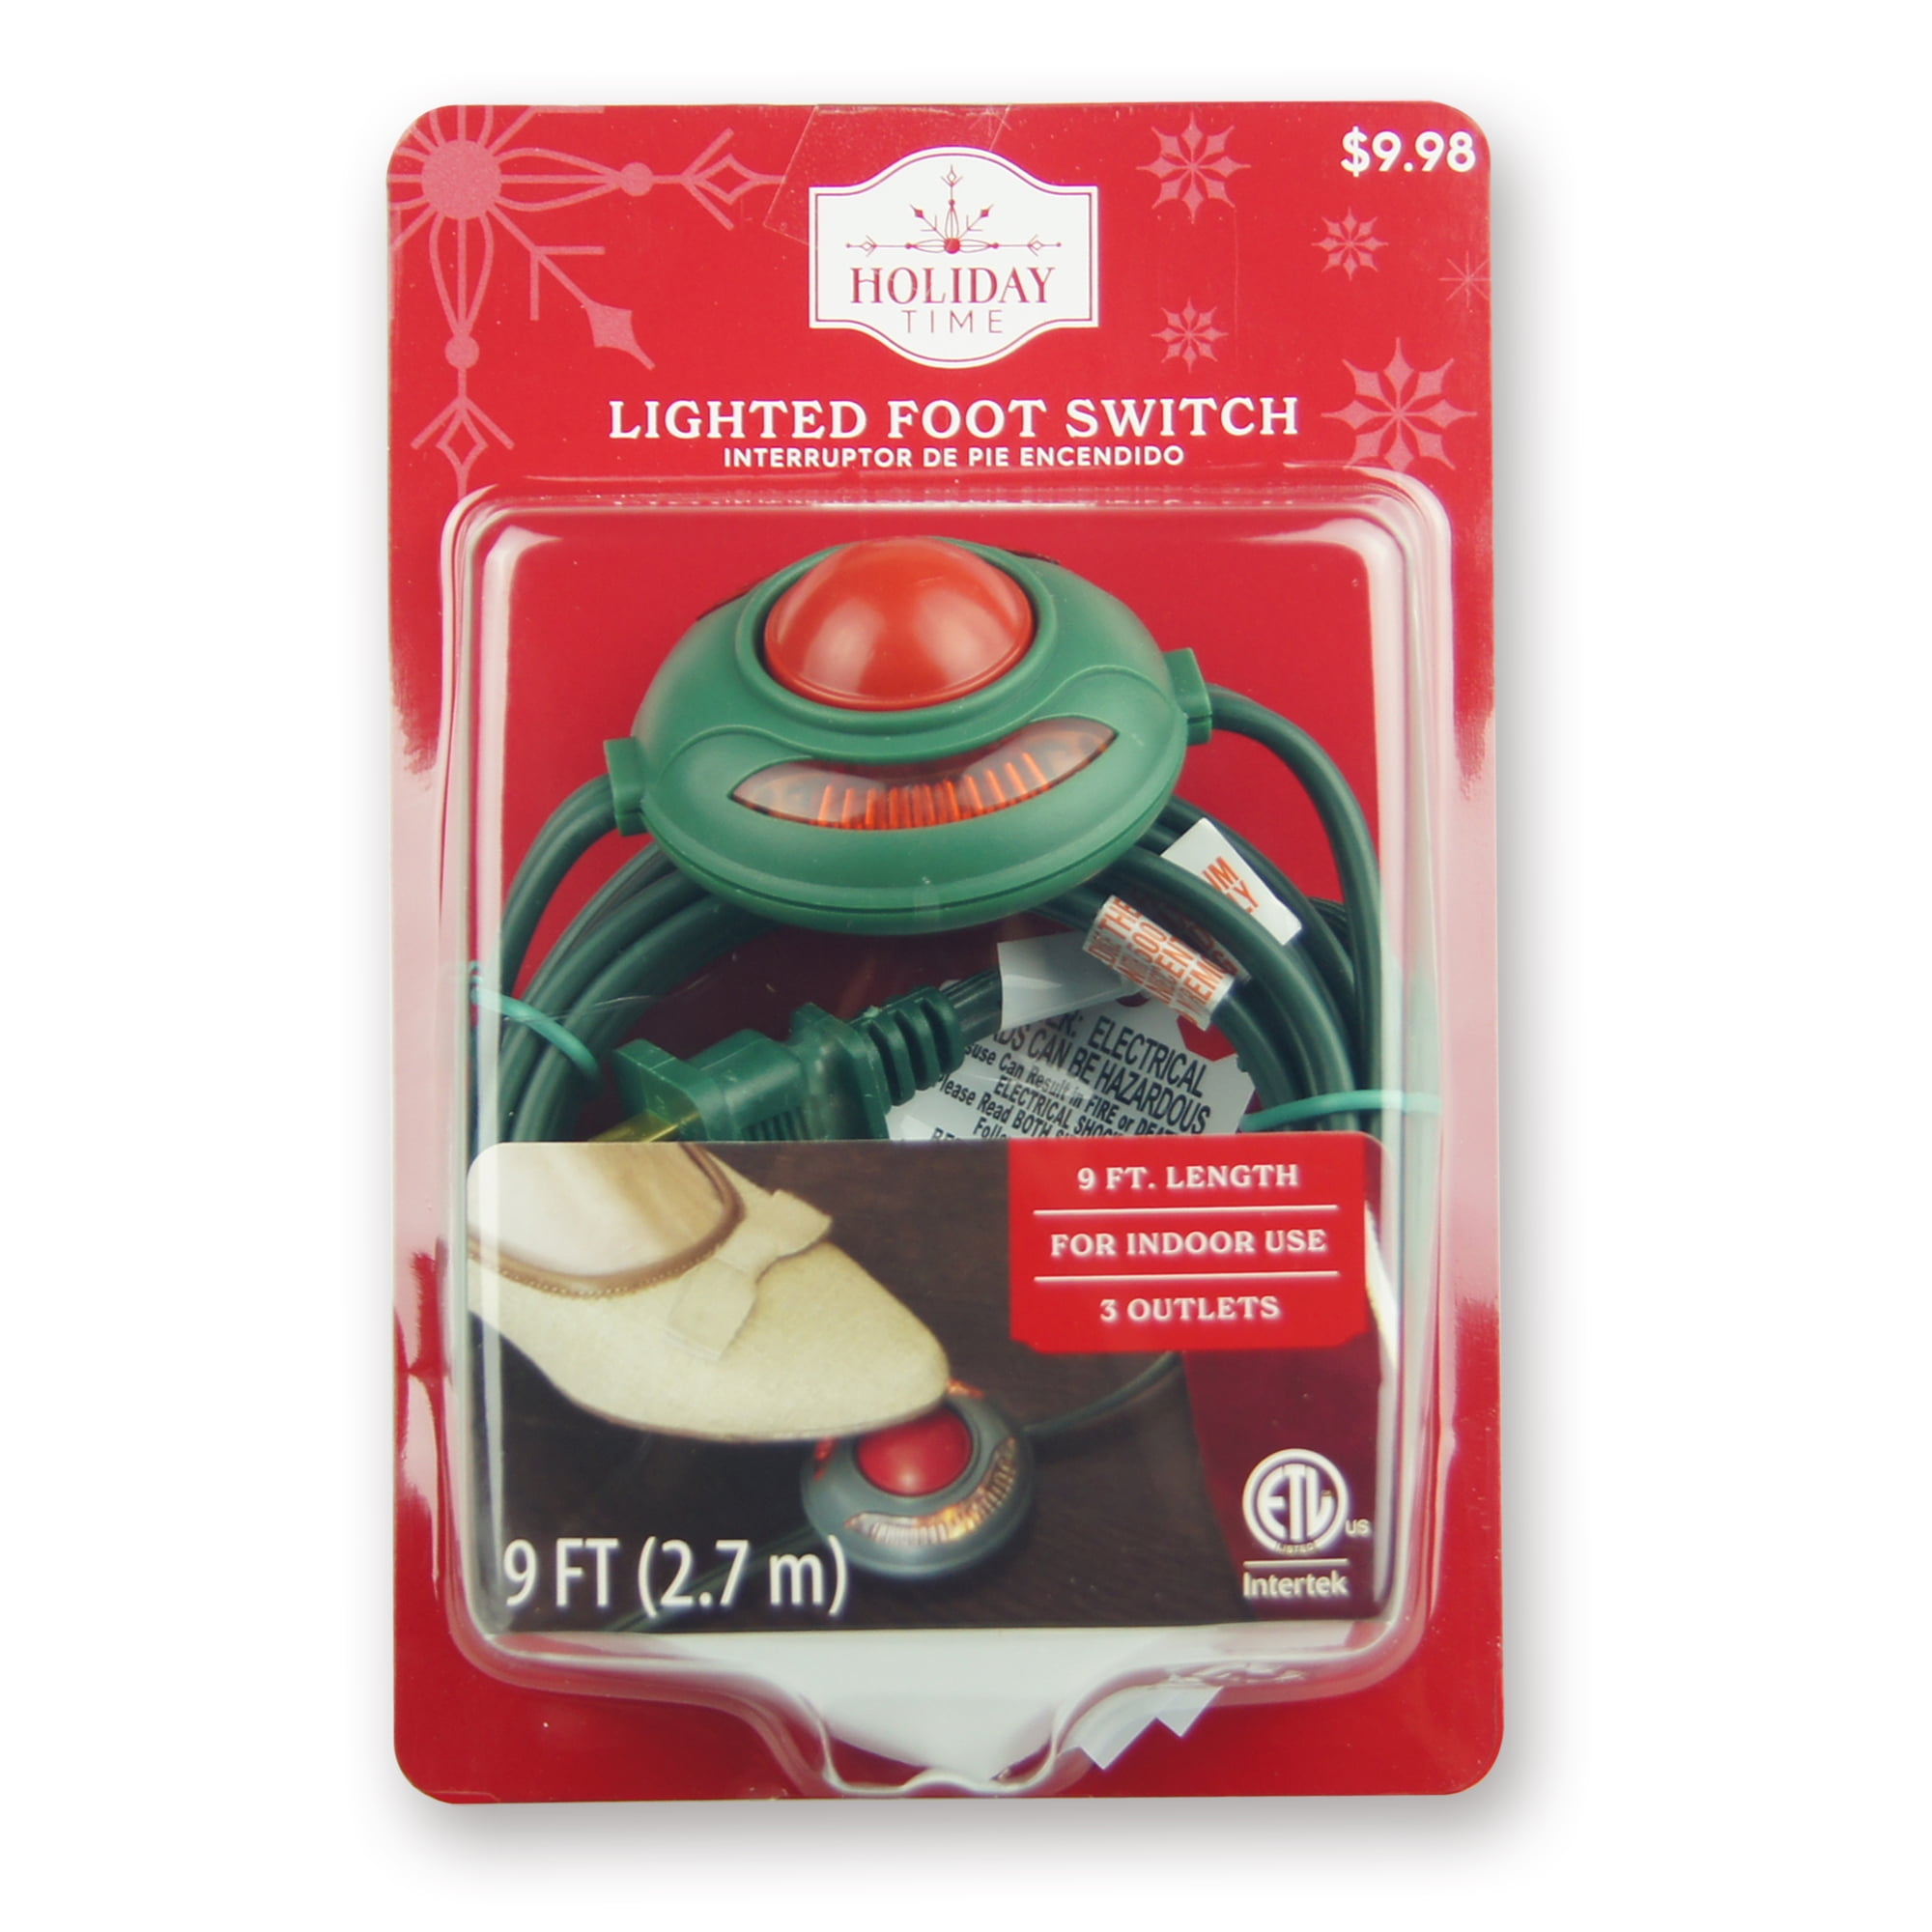 Holiday Time Lighted Foot Switch, 9'